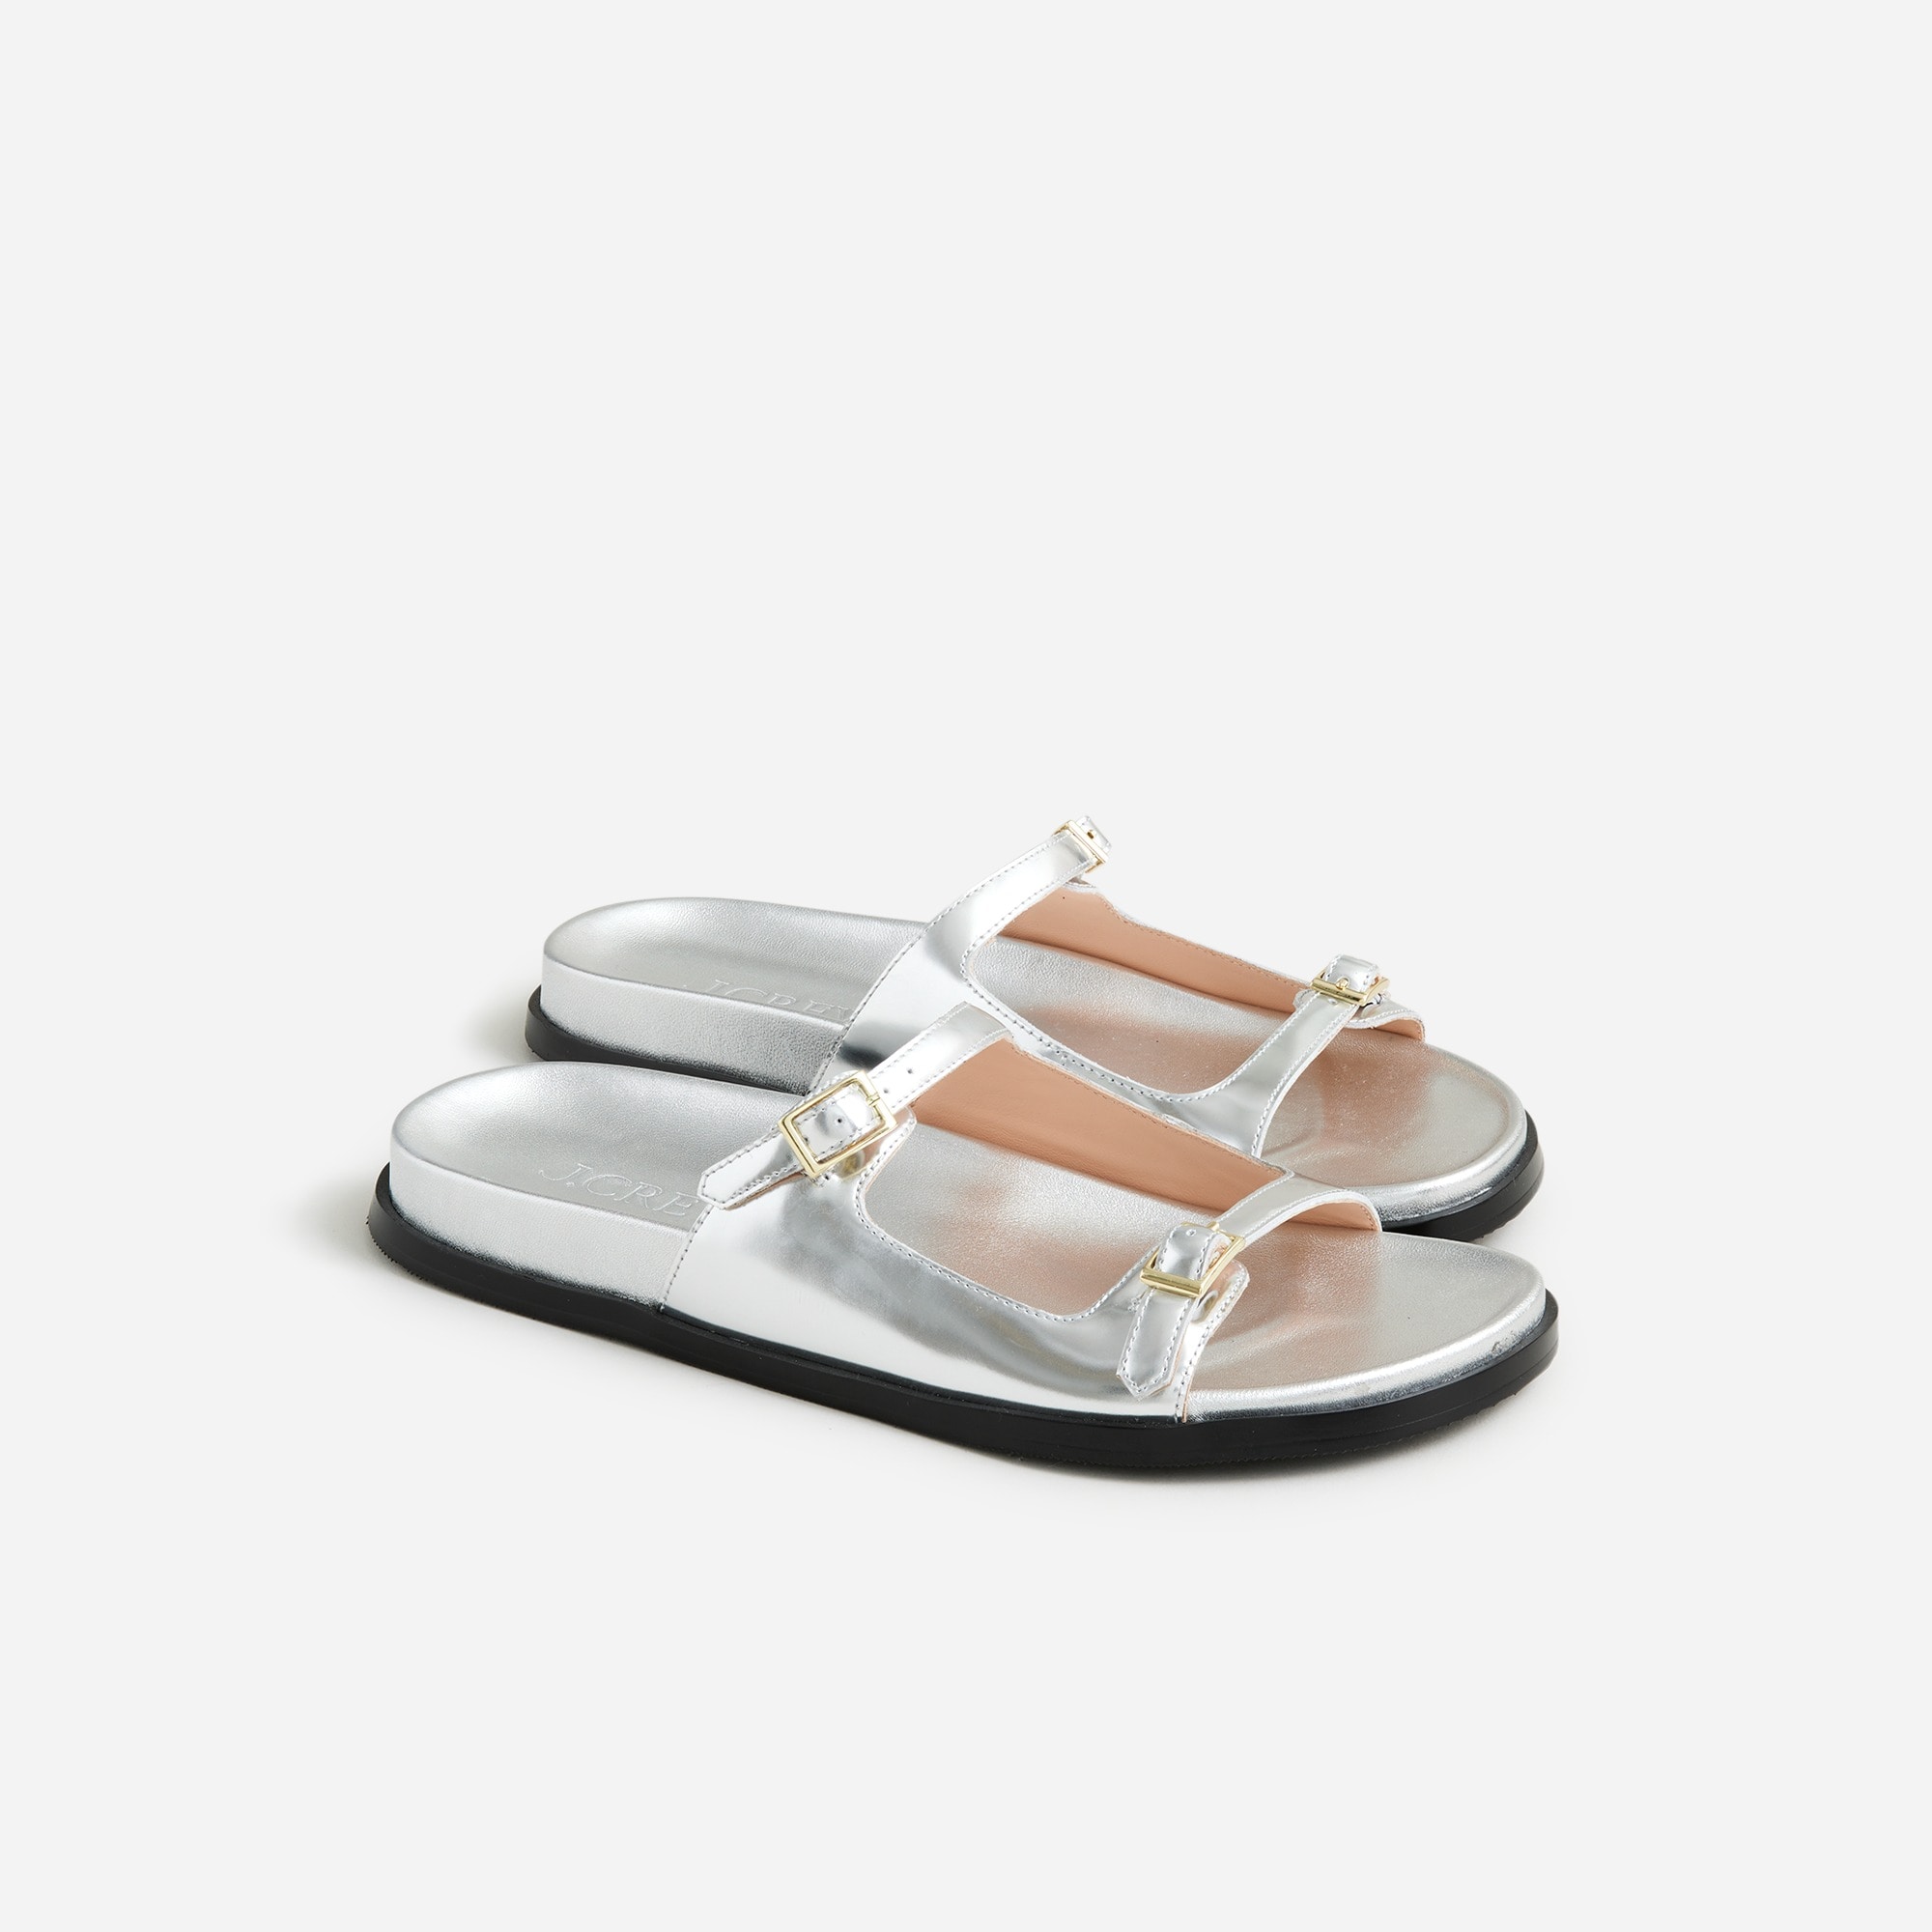  Colbie buckle sandals in metallic leather